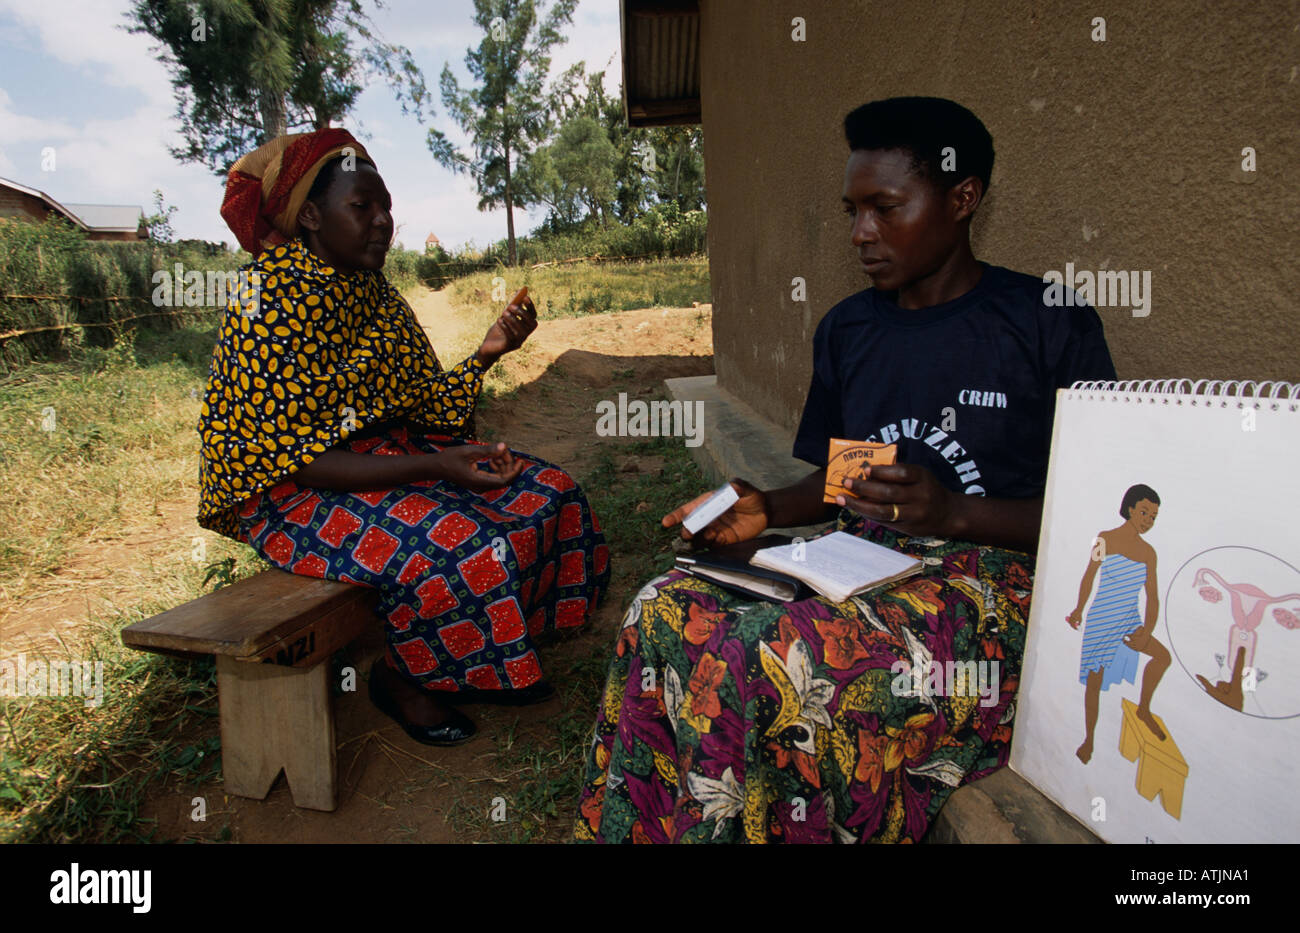 Volunteer introduces African woman to contraception, Uganda Stock Photo